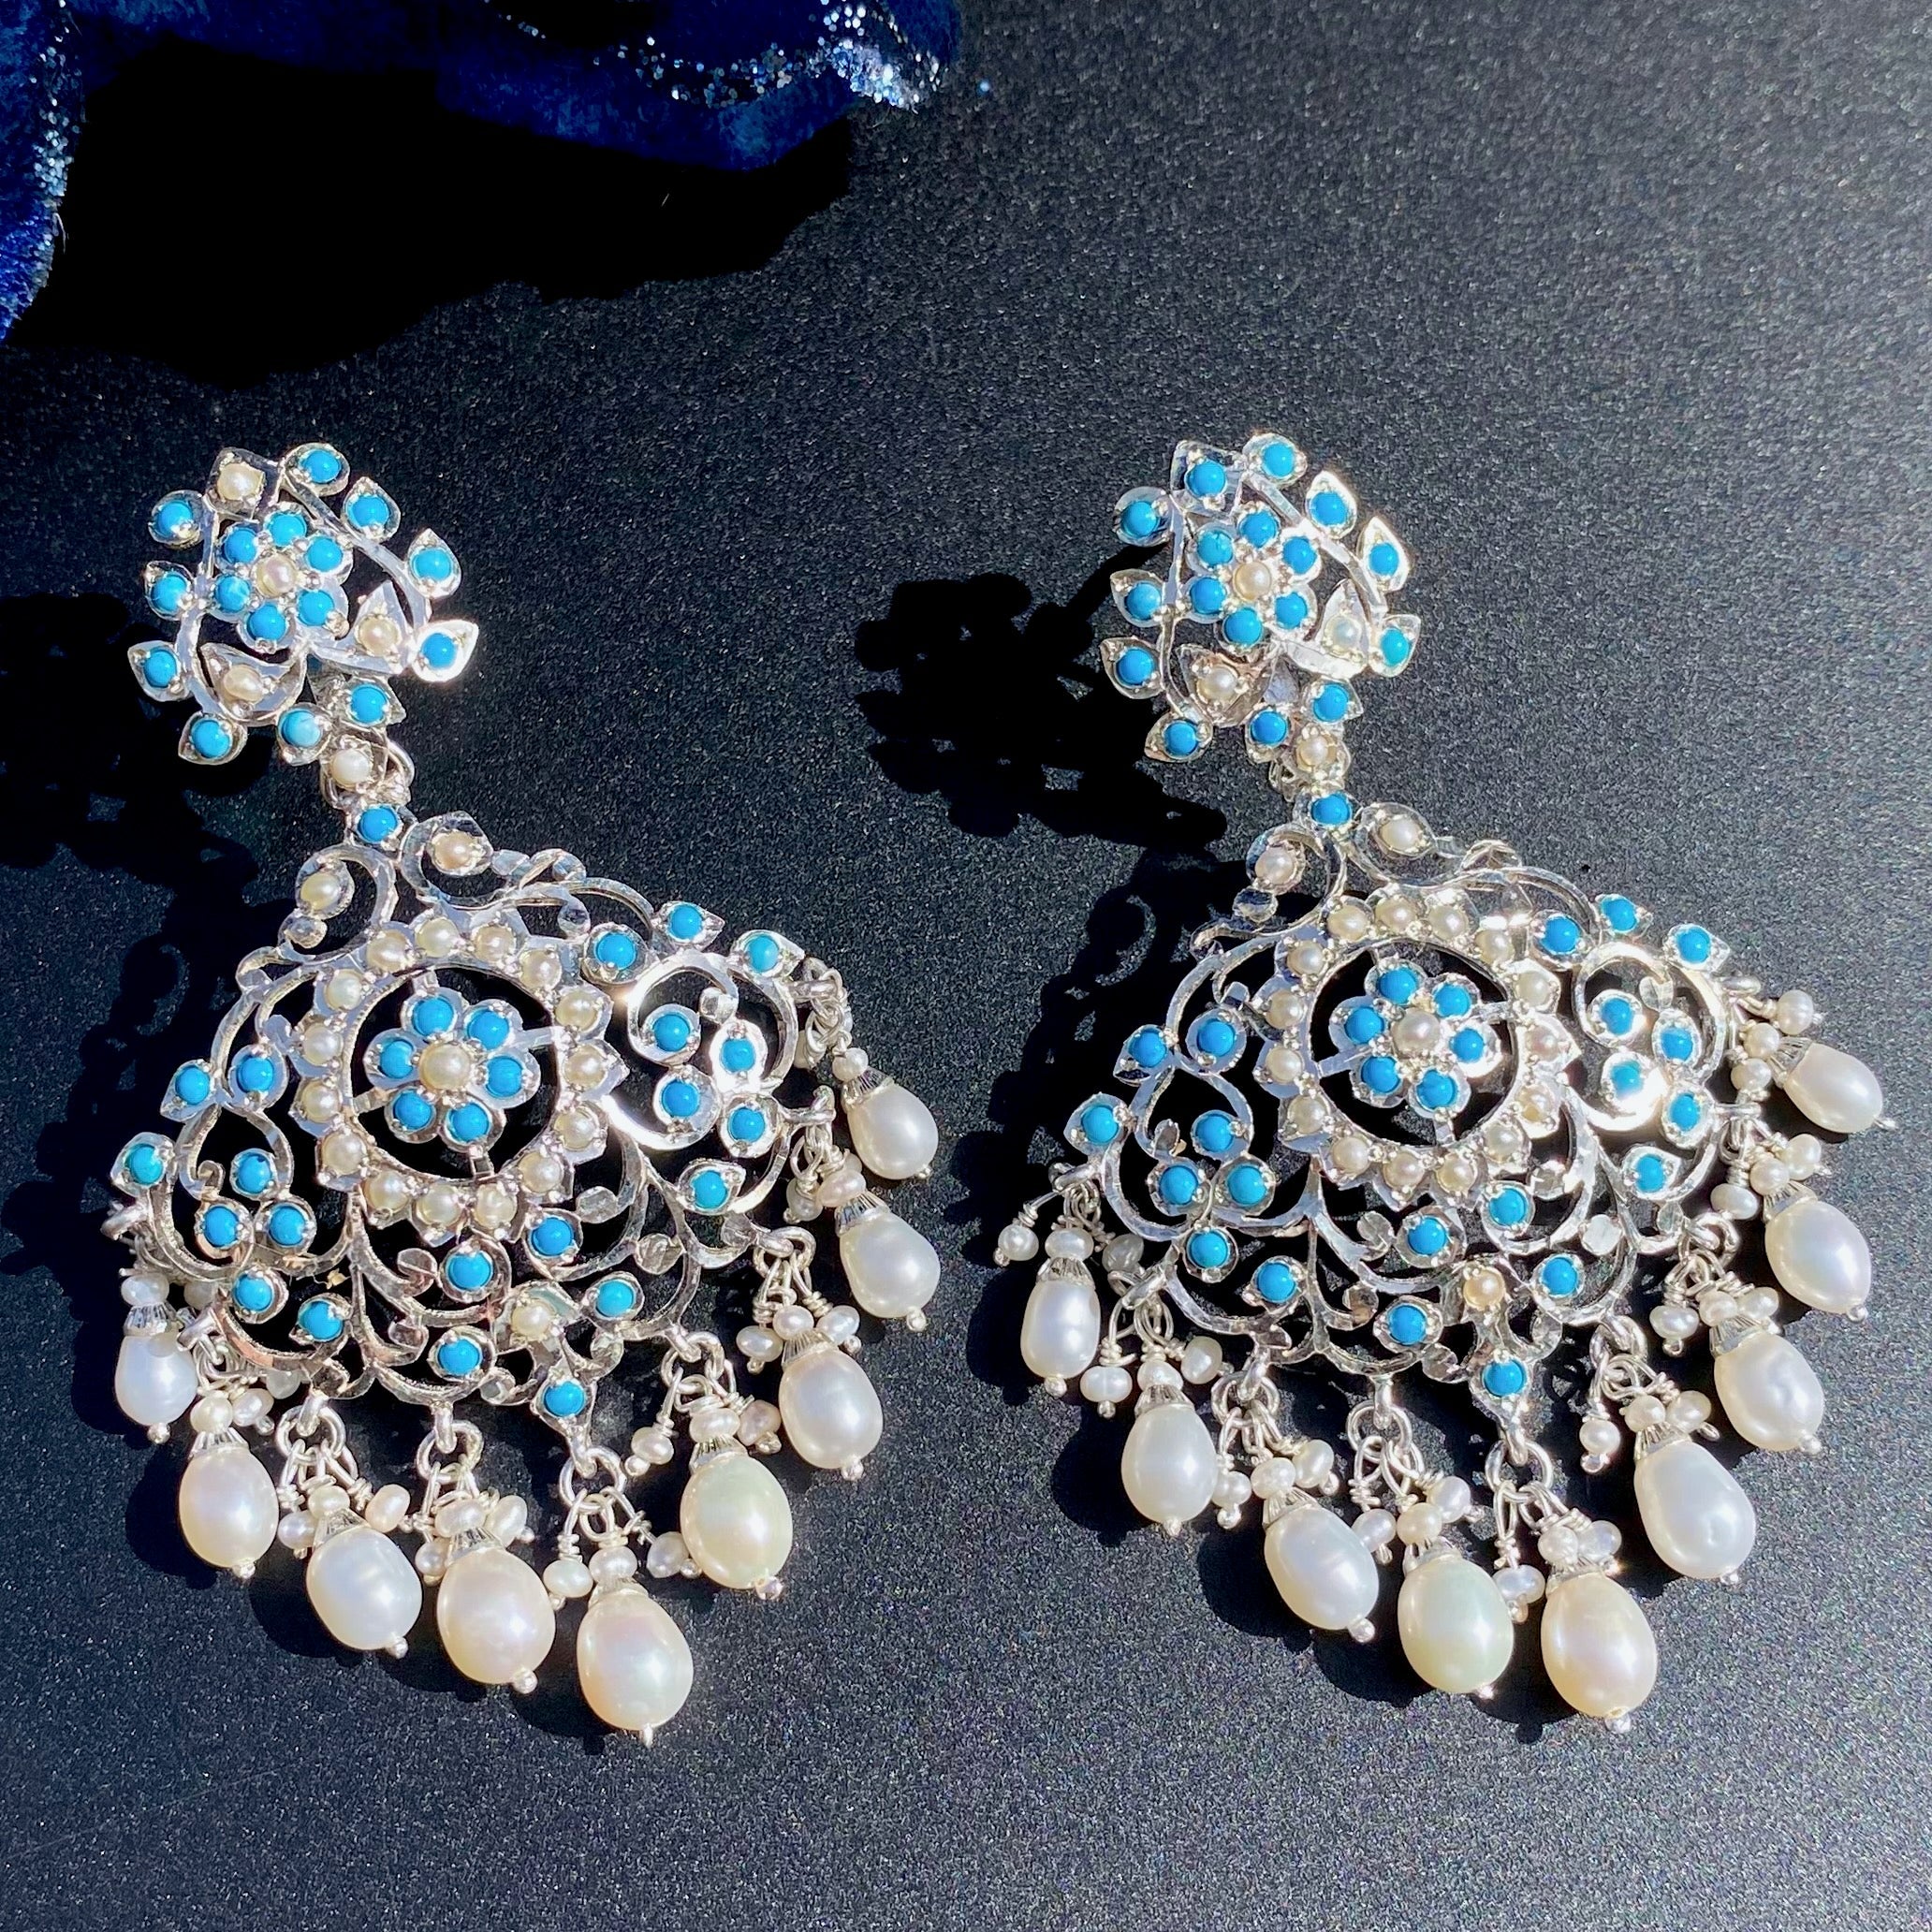 Edwardian Earrings | Pearls & Turquoise Studded | 925 Sterling Silver